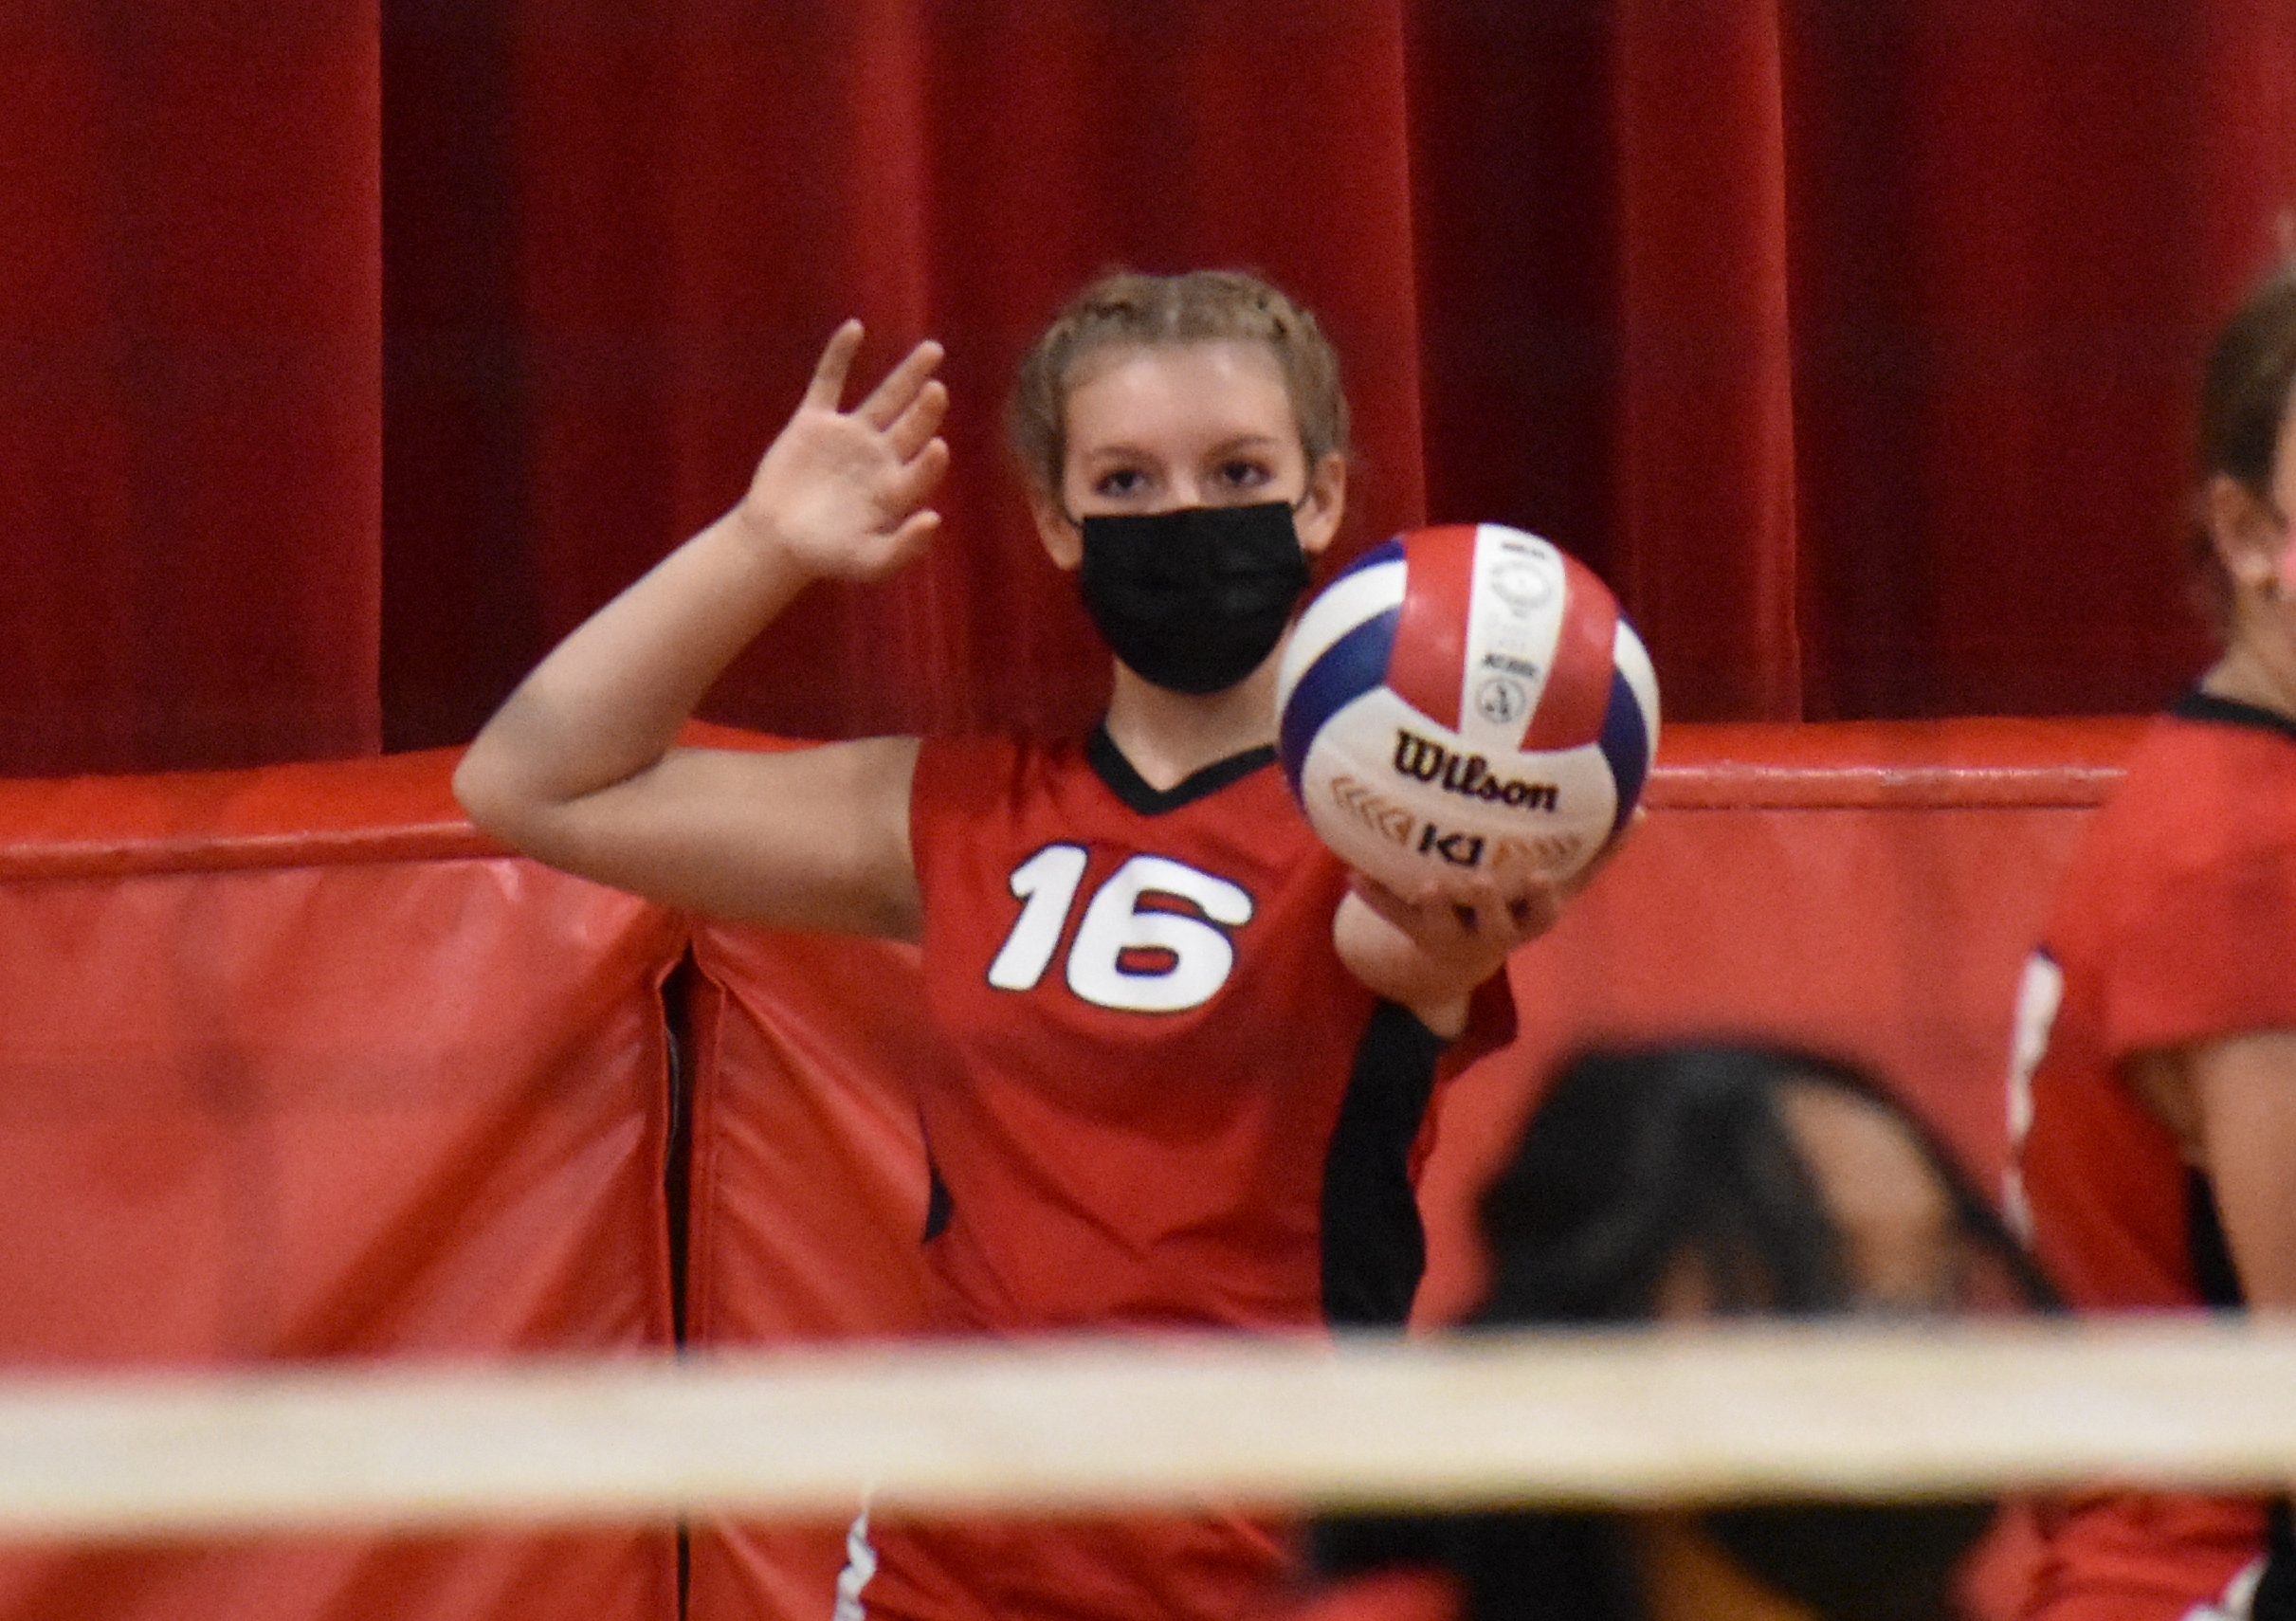 volleyball player gets ready to serve the ball in a game